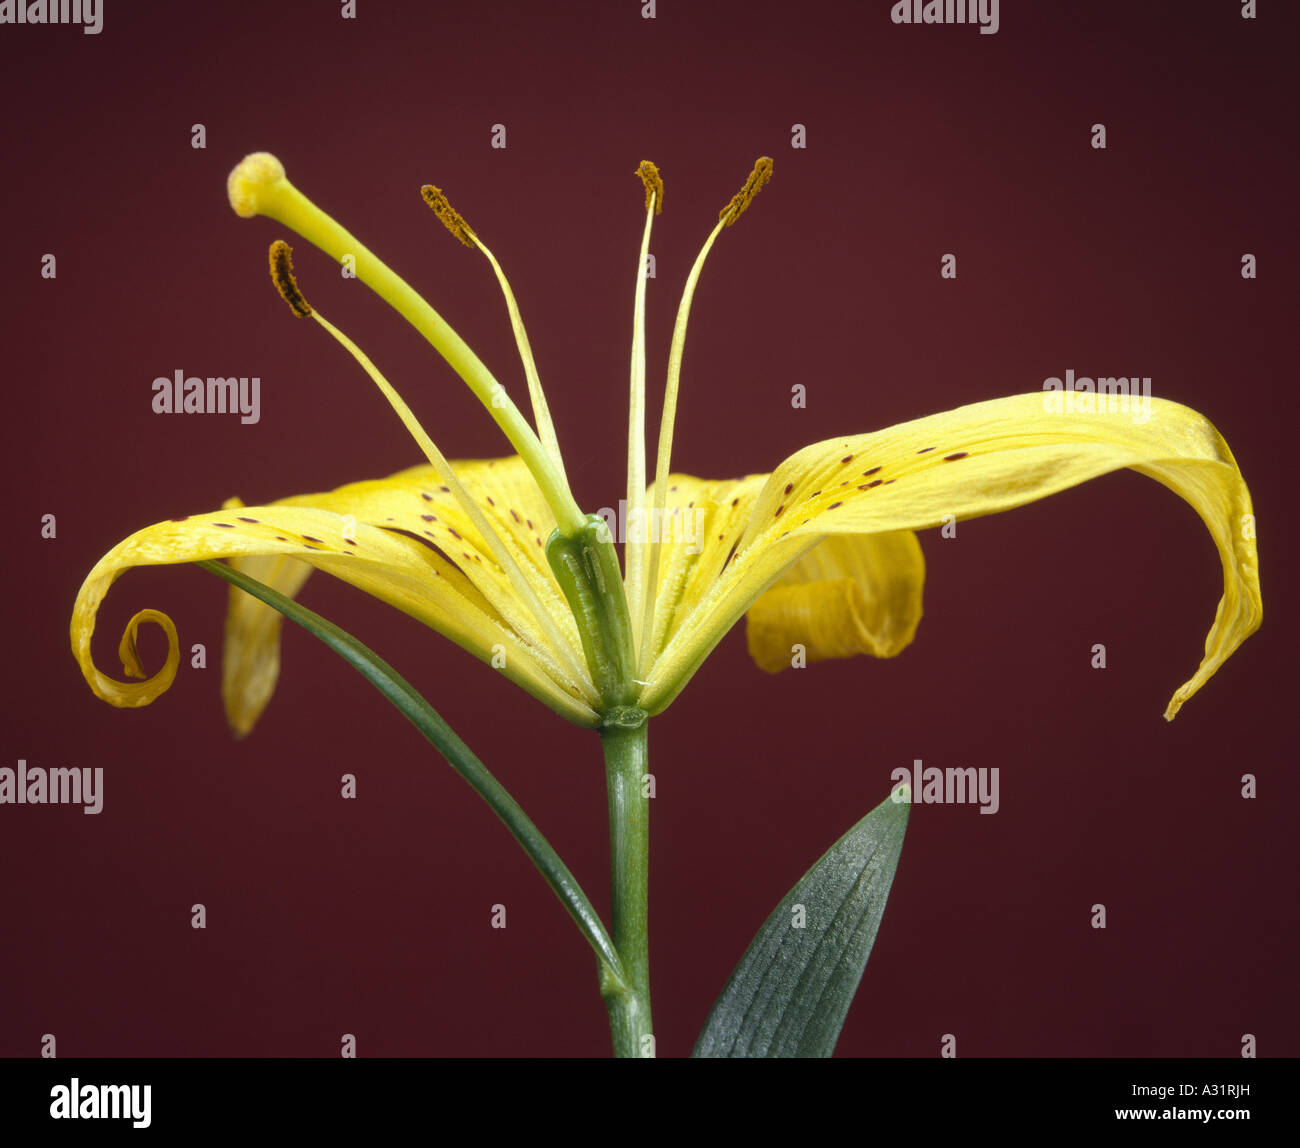 FLOWER PARTS ON LILY (LILIUM SP.) SHOWS PISTIL, STIGMA, STYLE, OVARY AND IMMATURE OVULES / STUDIO Stock Photo